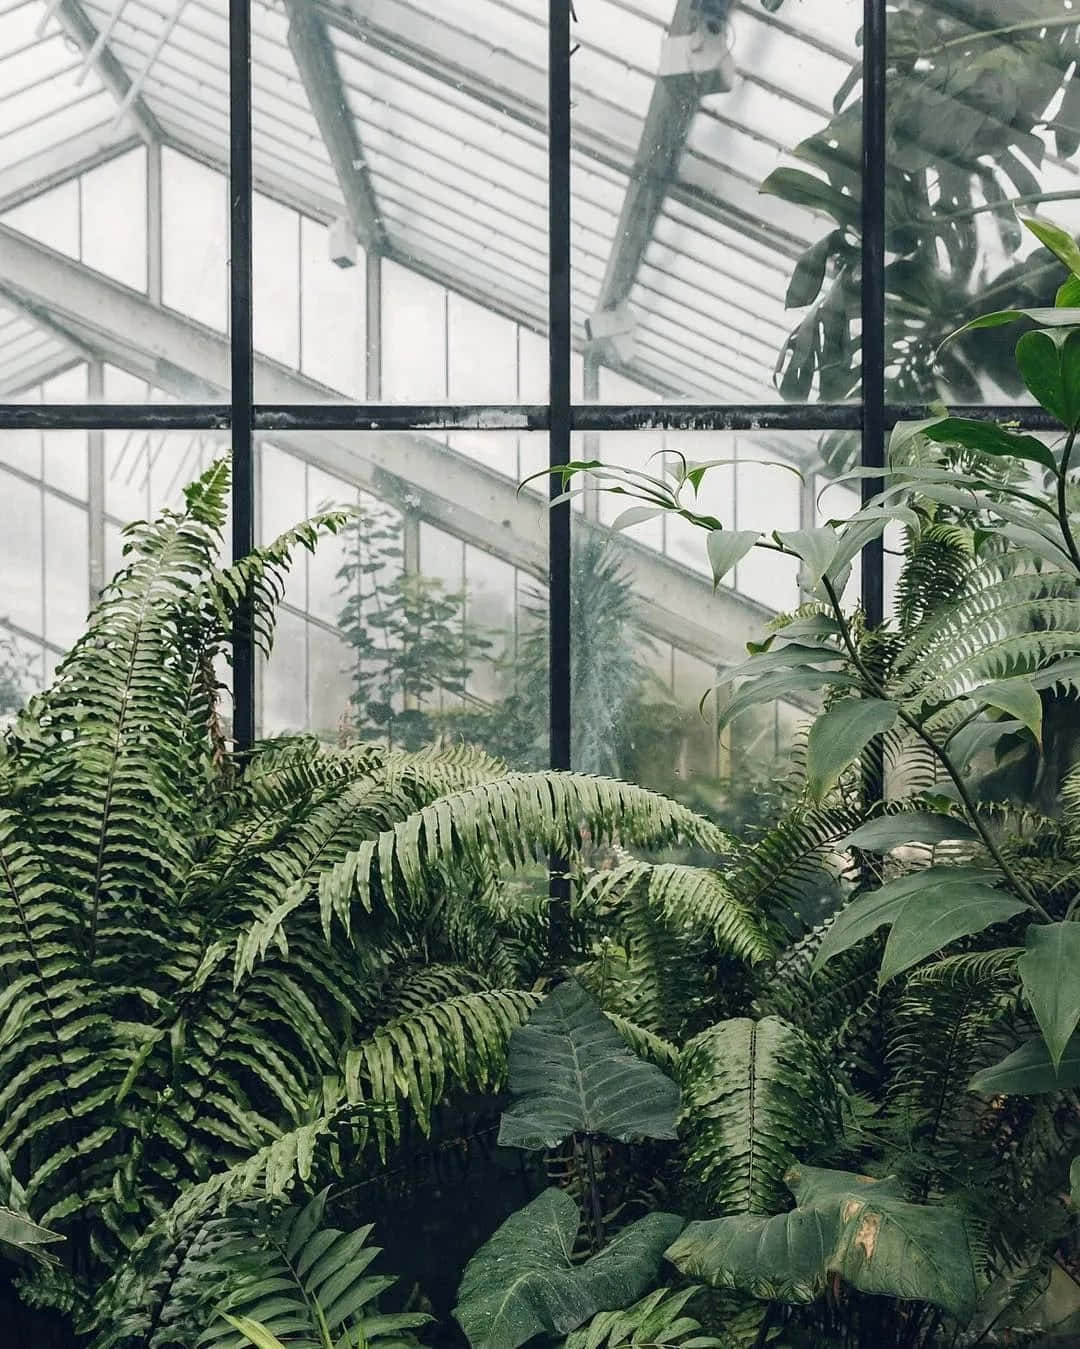 Ferns And Plants In A Greenhouse